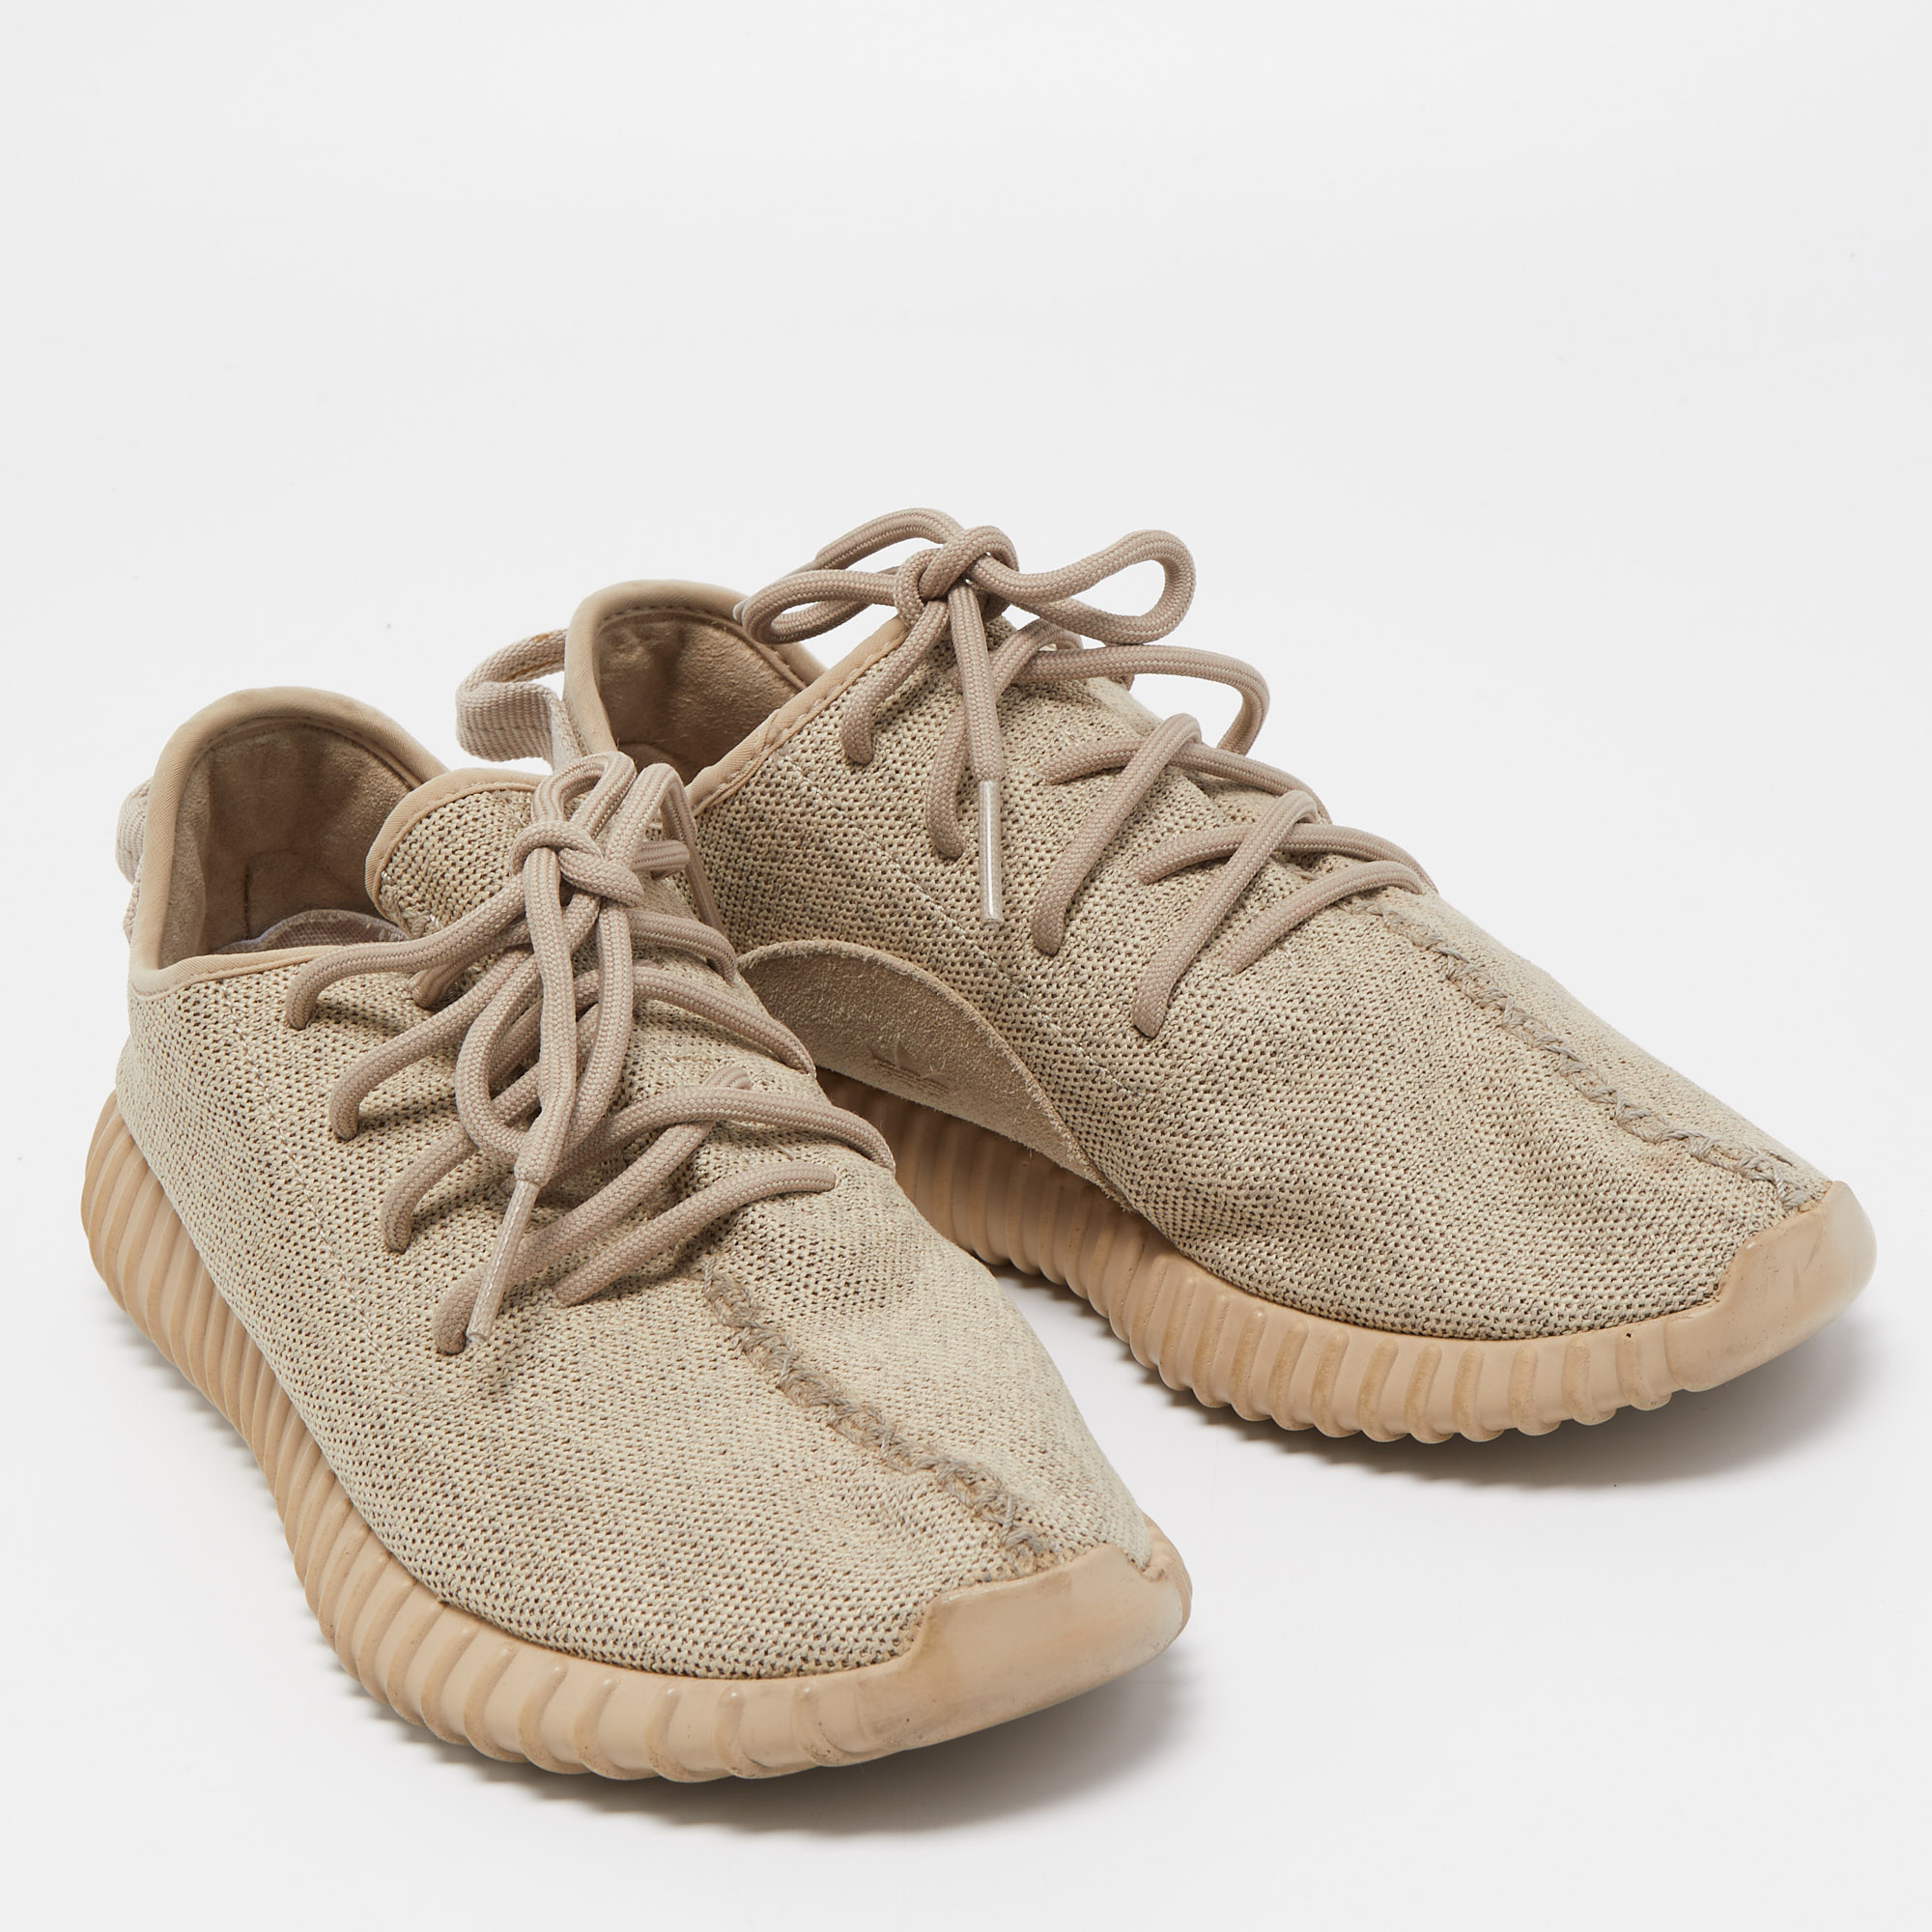 Yeezy X Adidas Brown Suede Boost 350 V2 Oxford Tan Sneakers Size 42